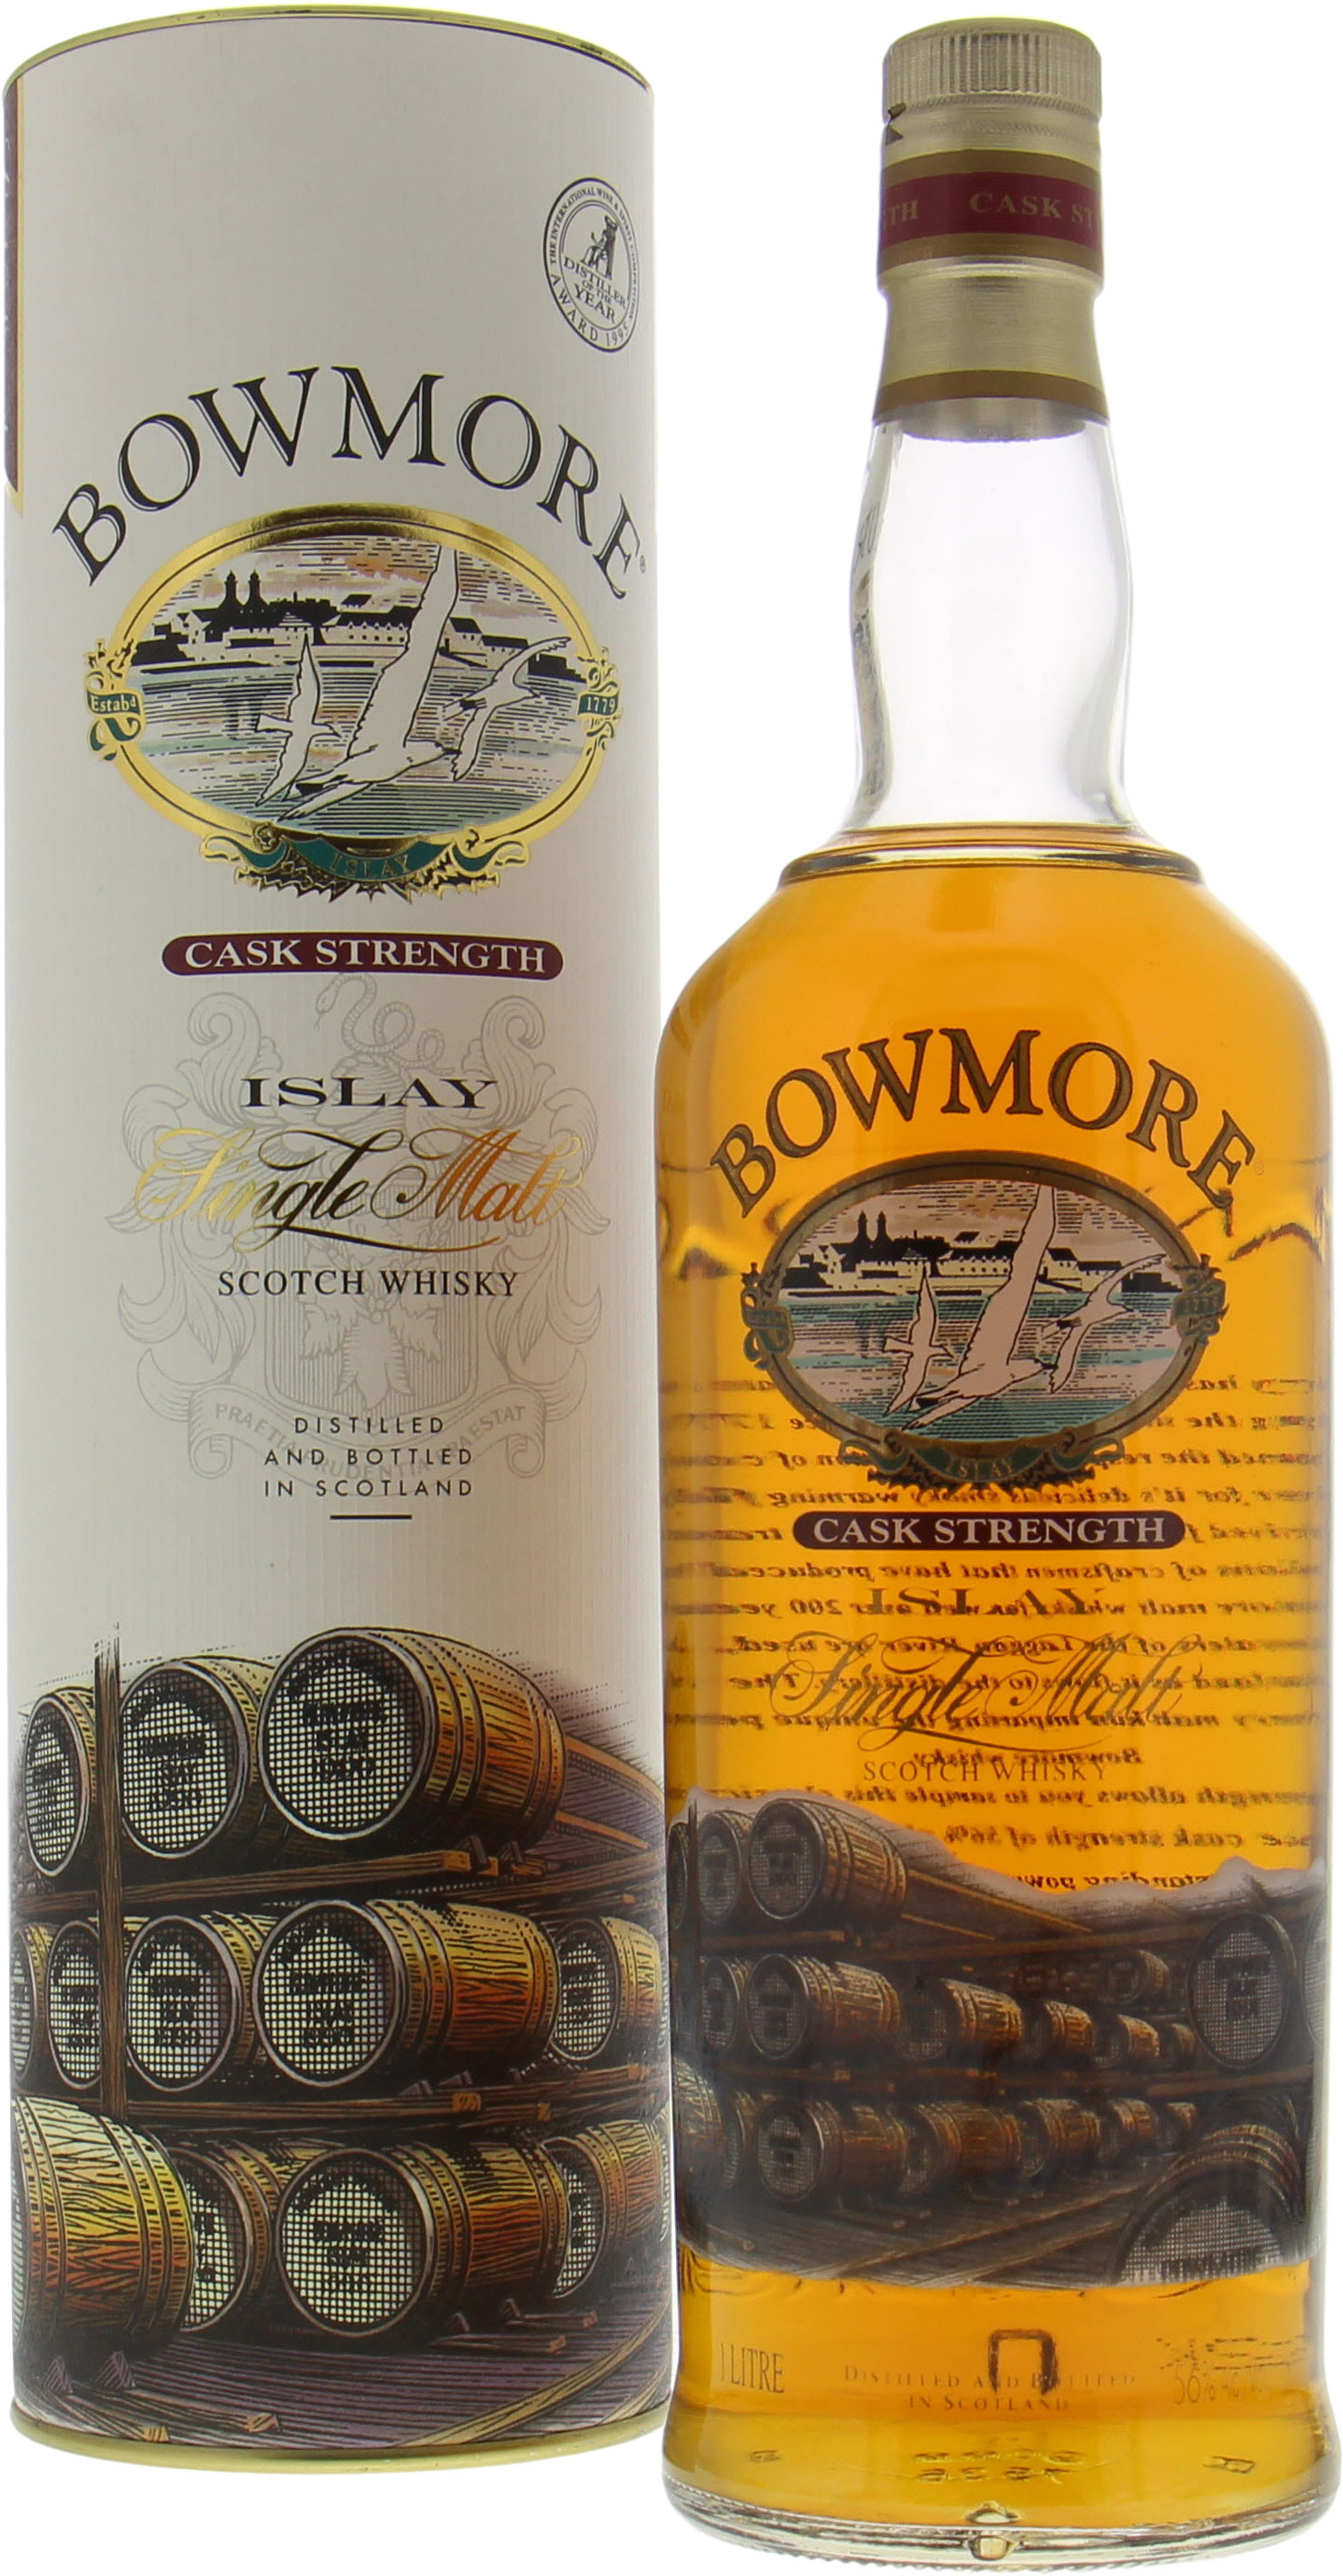 Bowmore - Cask Strength Glass Printed Label 56% NV In Original Container